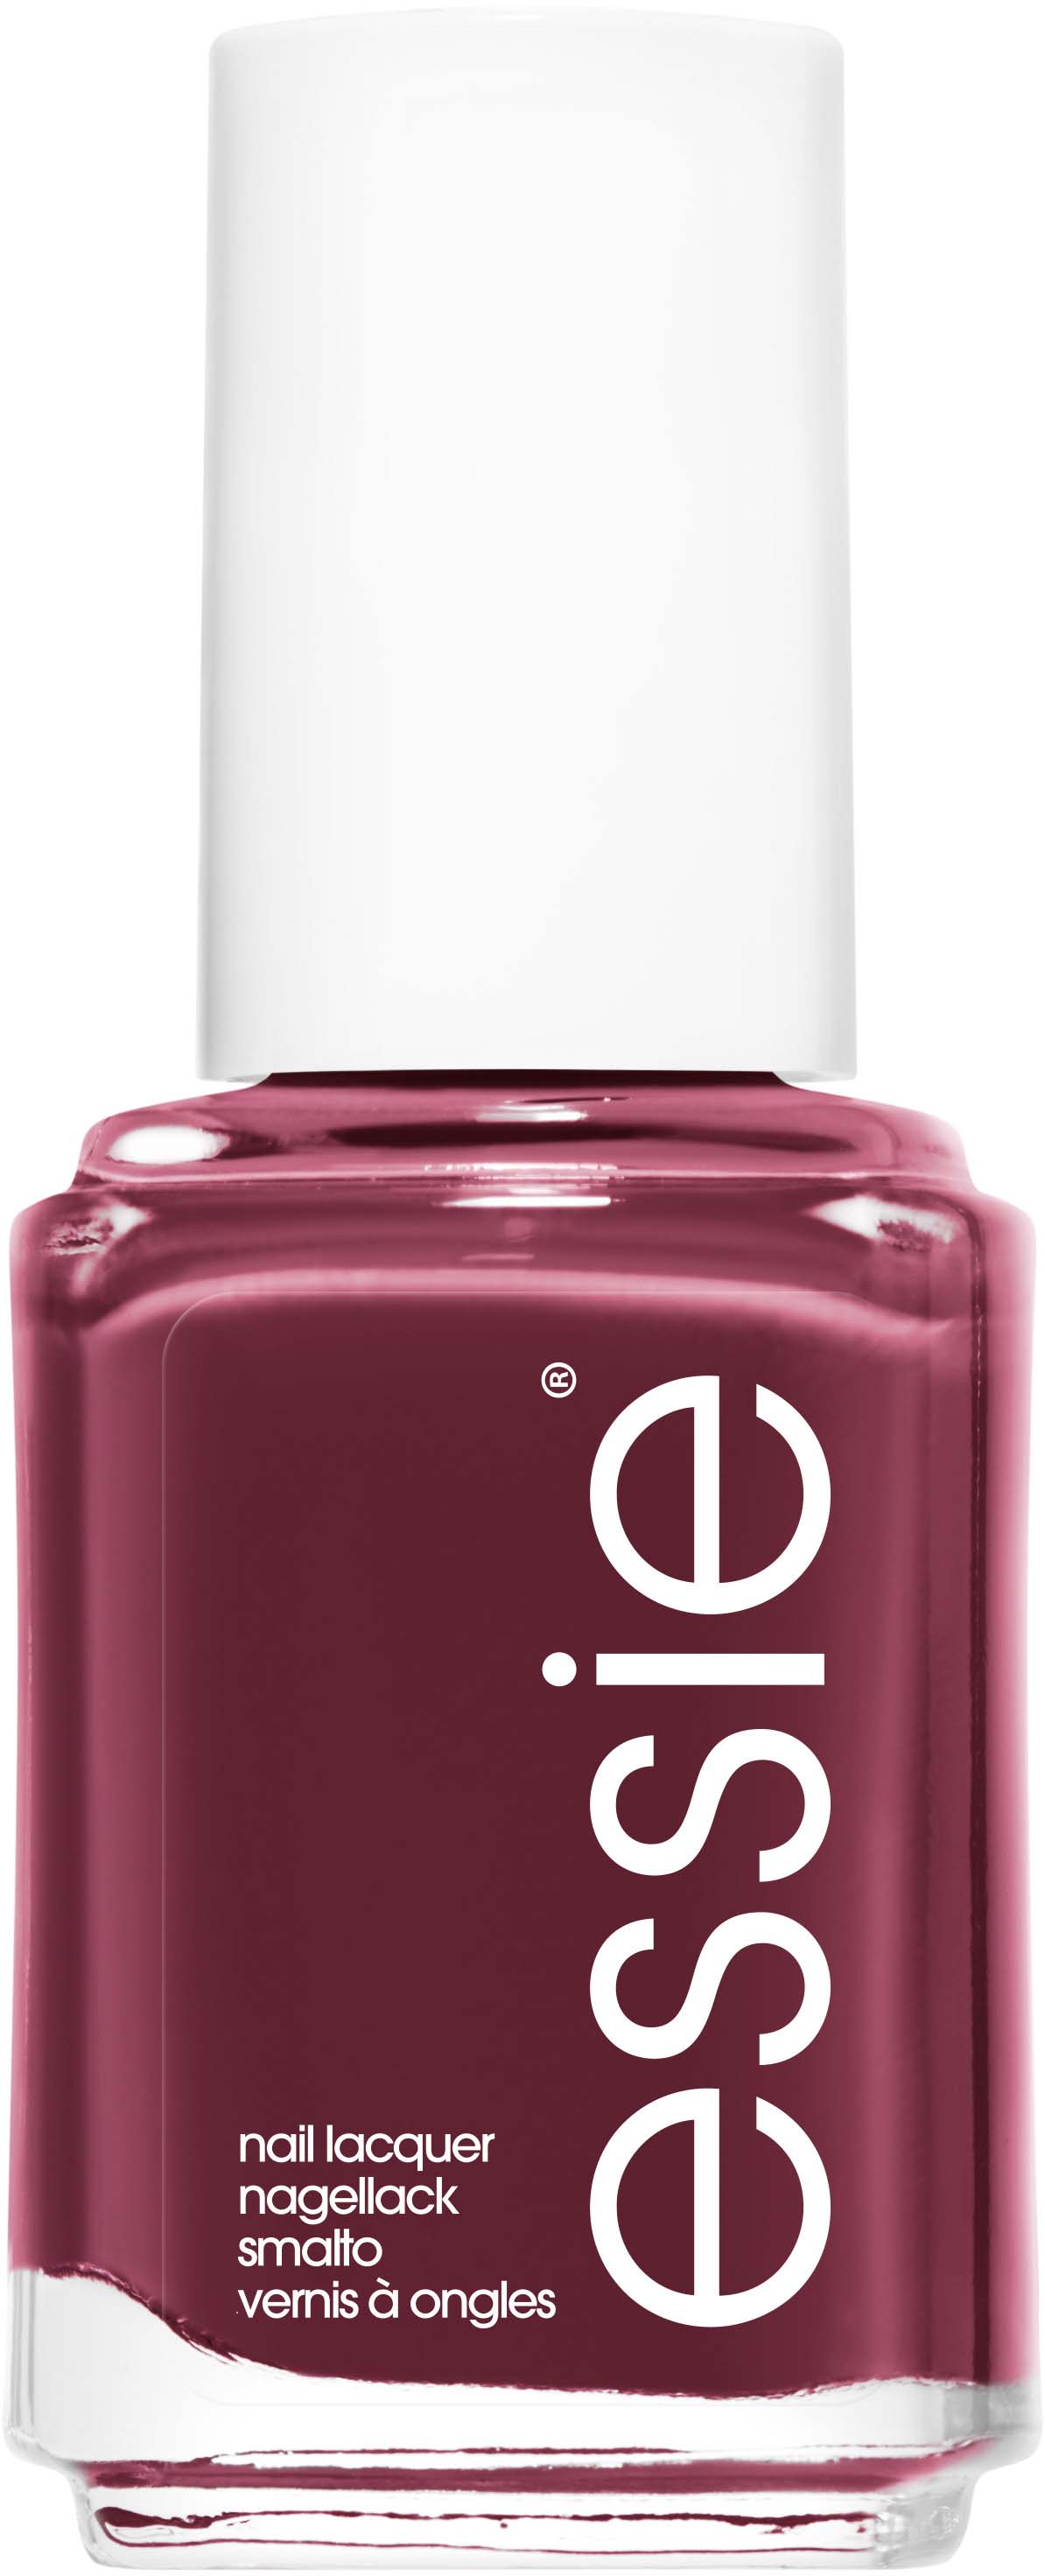 Lacquer 497 Nail Essie optional clothing